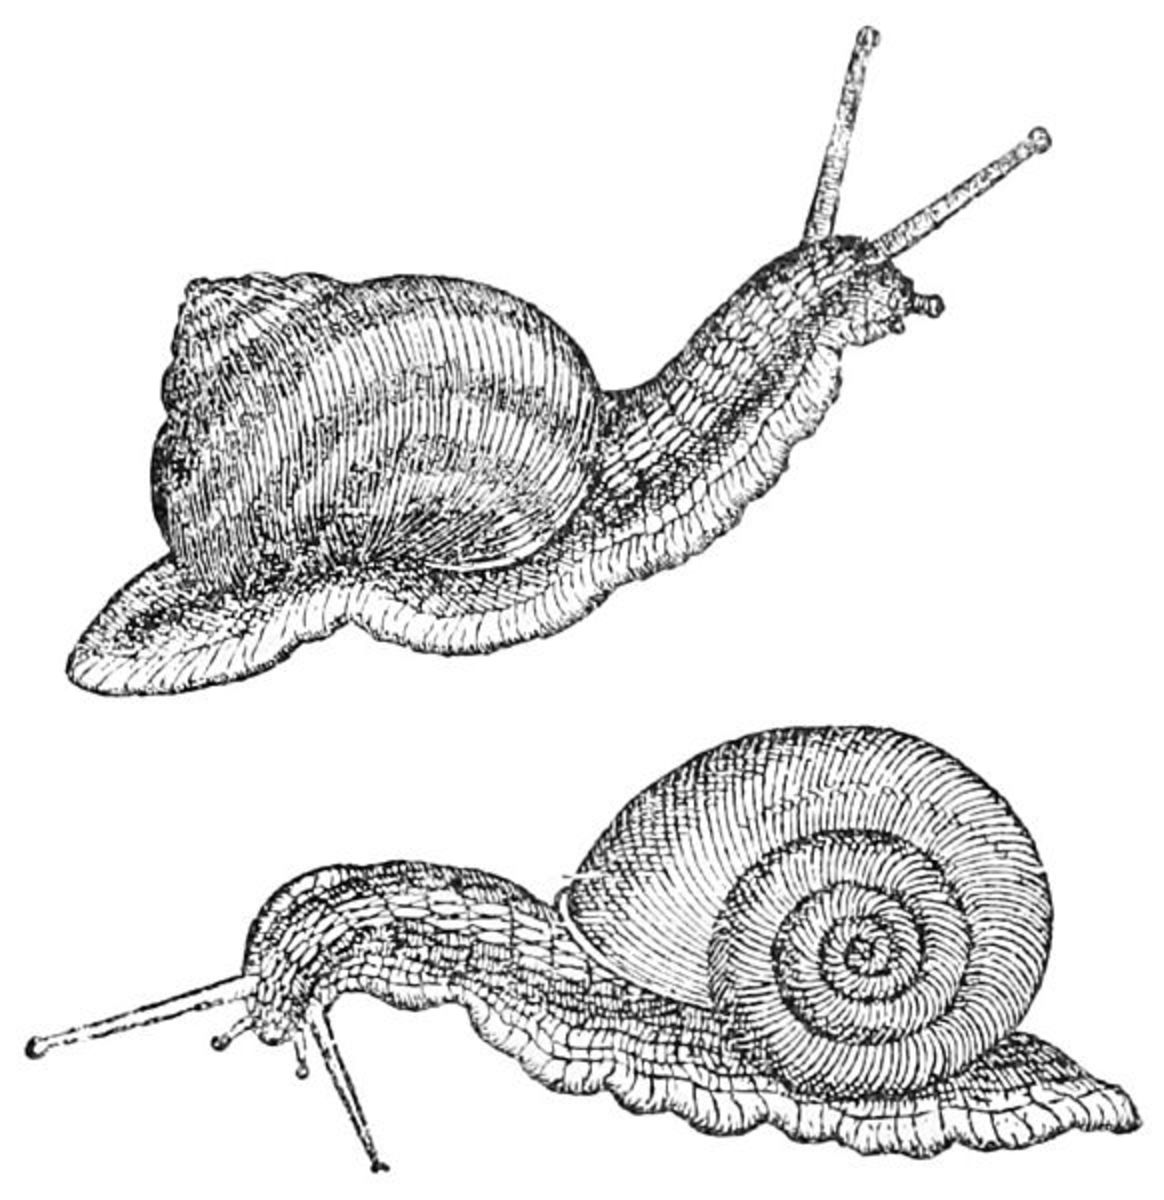 Gesner snails, from "Popular Science Monthly"